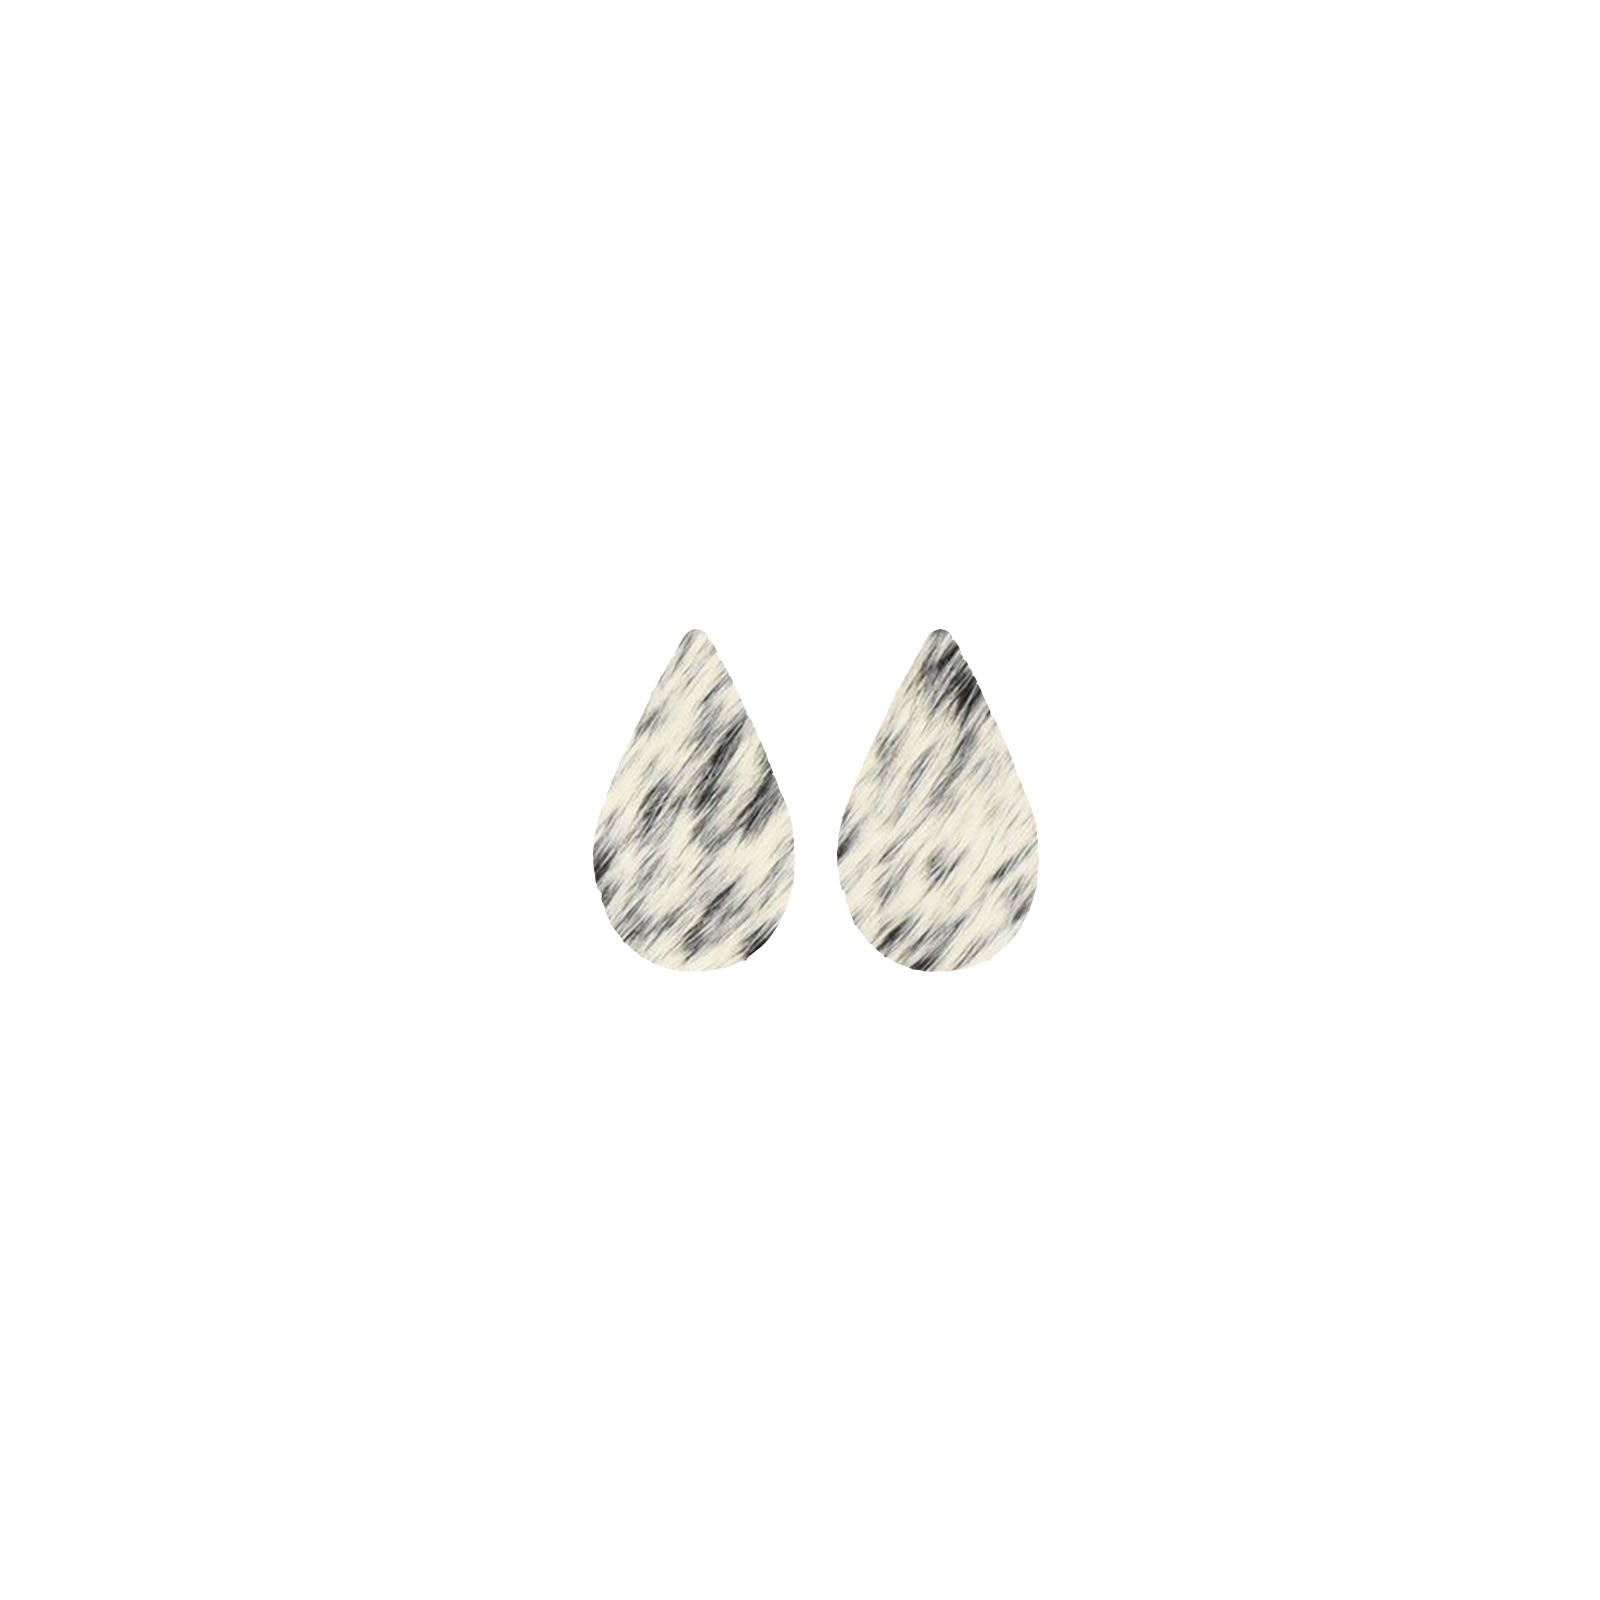 Spotted Light Black and Off White Hair On Die Cut Earrings, Mini Teardrop | The Leather Guy